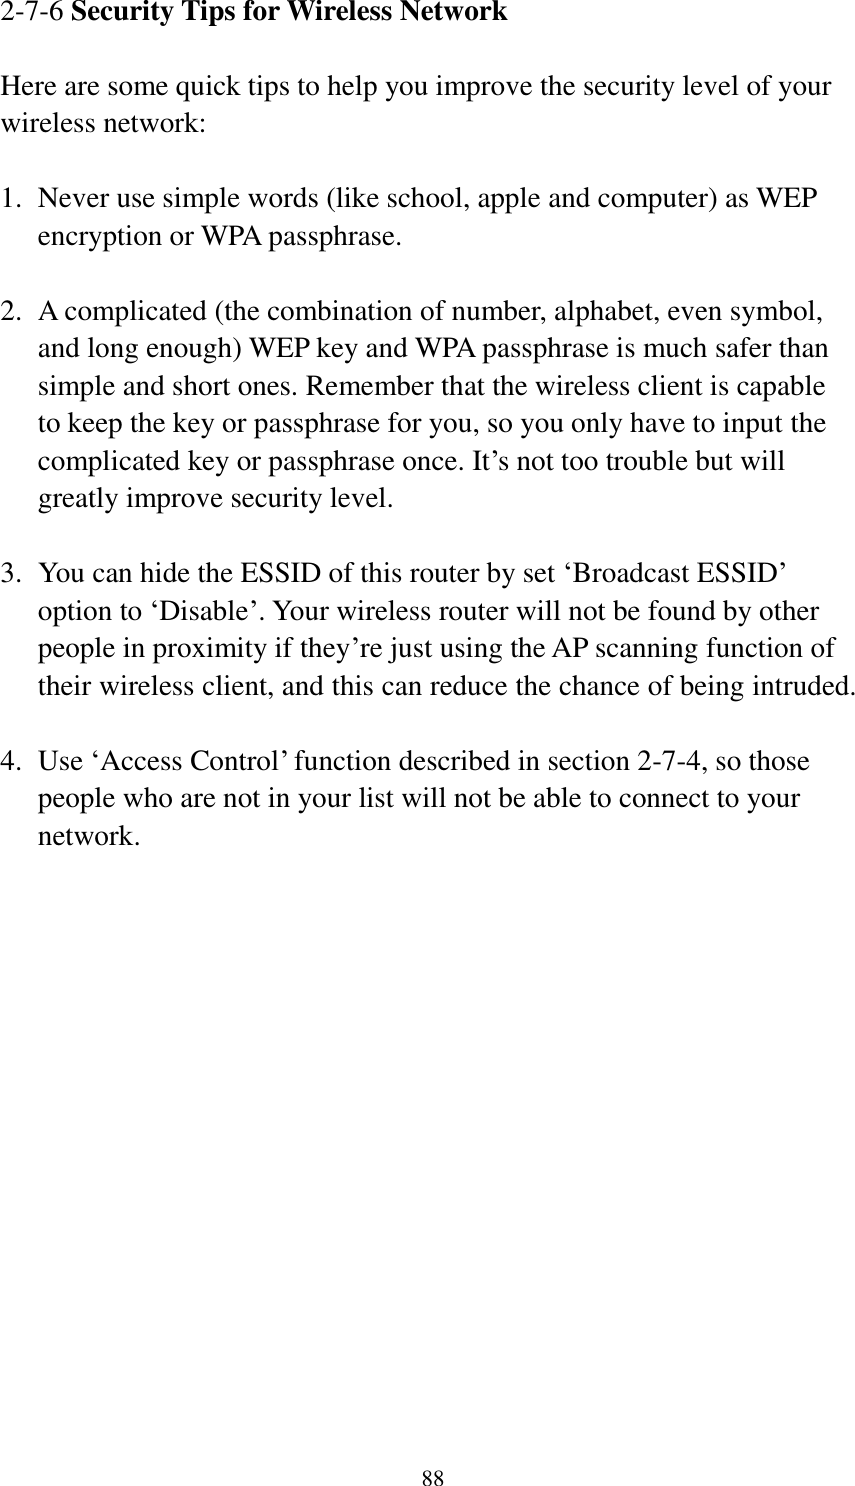 88 2-7-6 Security Tips for Wireless Network  Here are some quick tips to help you improve the security level of your wireless network:  1. Never use simple words (like school, apple and computer) as WEP encryption or WPA passphrase.  2. A complicated (the combination of number, alphabet, even symbol, and long enough) WEP key and WPA passphrase is much safer than simple and short ones. Remember that the wireless client is capable to keep the key or passphrase for you, so you only have to input the complicated key or passphrase once. It‟s not too trouble but will greatly improve security level.  3. You can hide the ESSID of this router by set „Broadcast ESSID‟ option to „Disable‟. Your wireless router will not be found by other people in proximity if they‟re just using the AP scanning function of their wireless client, and this can reduce the chance of being intruded.  4. Use „Access Control‟ function described in section 2-7-4, so those people who are not in your list will not be able to connect to your network. 